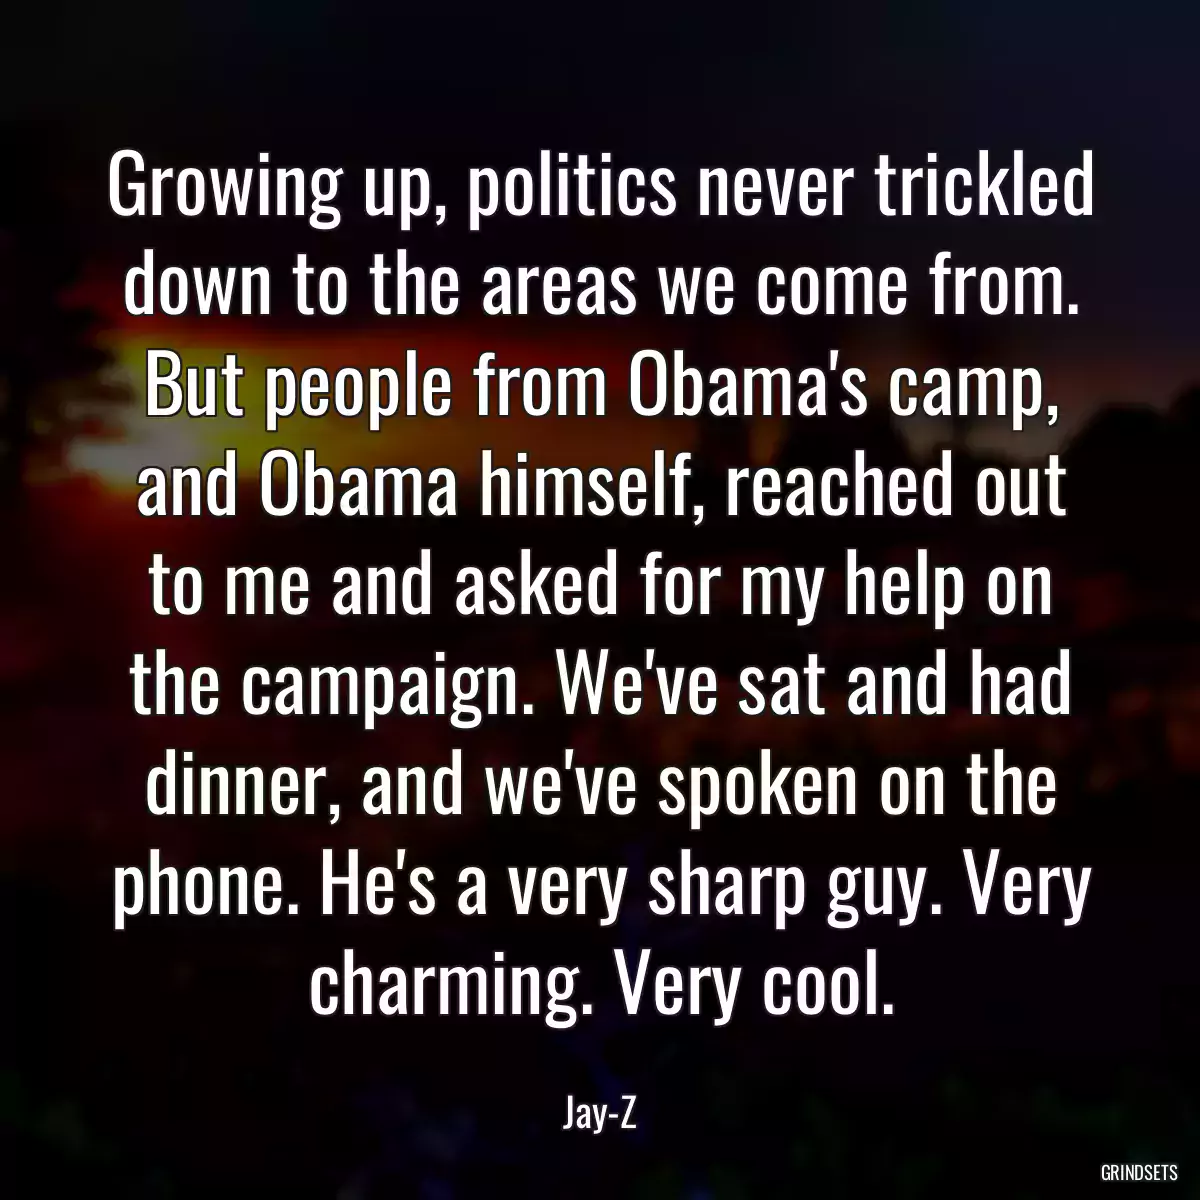 Growing up, politics never trickled down to the areas we come from. But people from Obama\'s camp, and Obama himself, reached out to me and asked for my help on the campaign. We\'ve sat and had dinner, and we\'ve spoken on the phone. He\'s a very sharp guy. Very charming. Very cool.